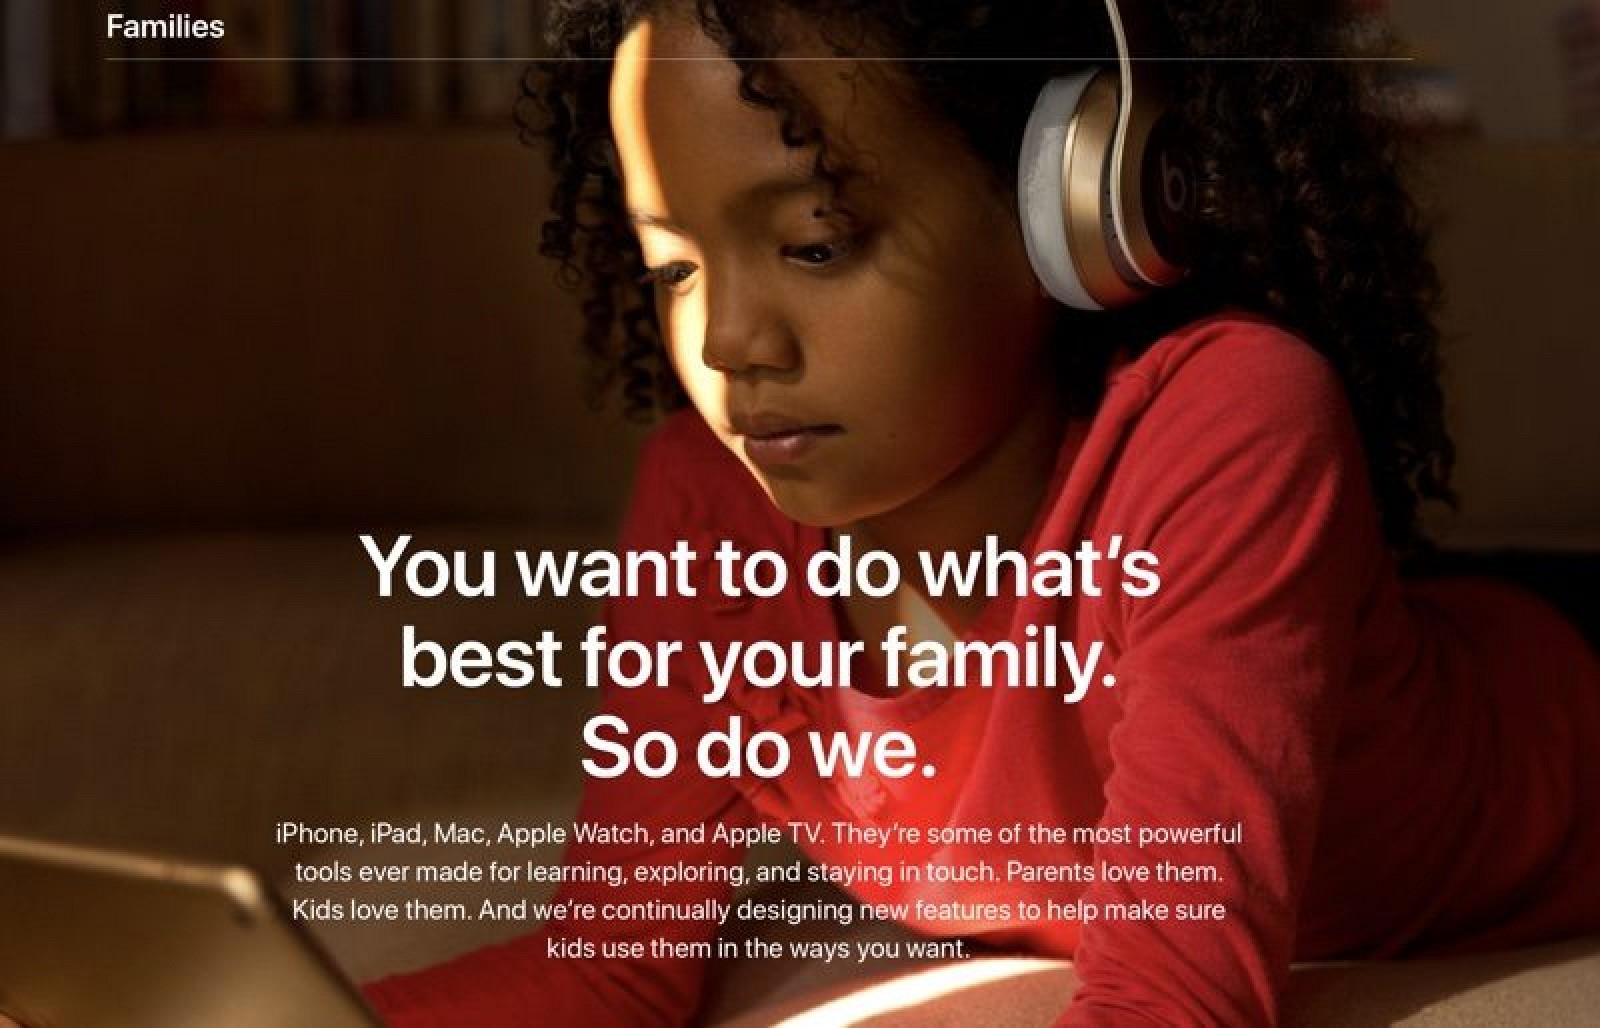 photo of Apple Adds New 'Families' Section to its Website With Tips for Parents image